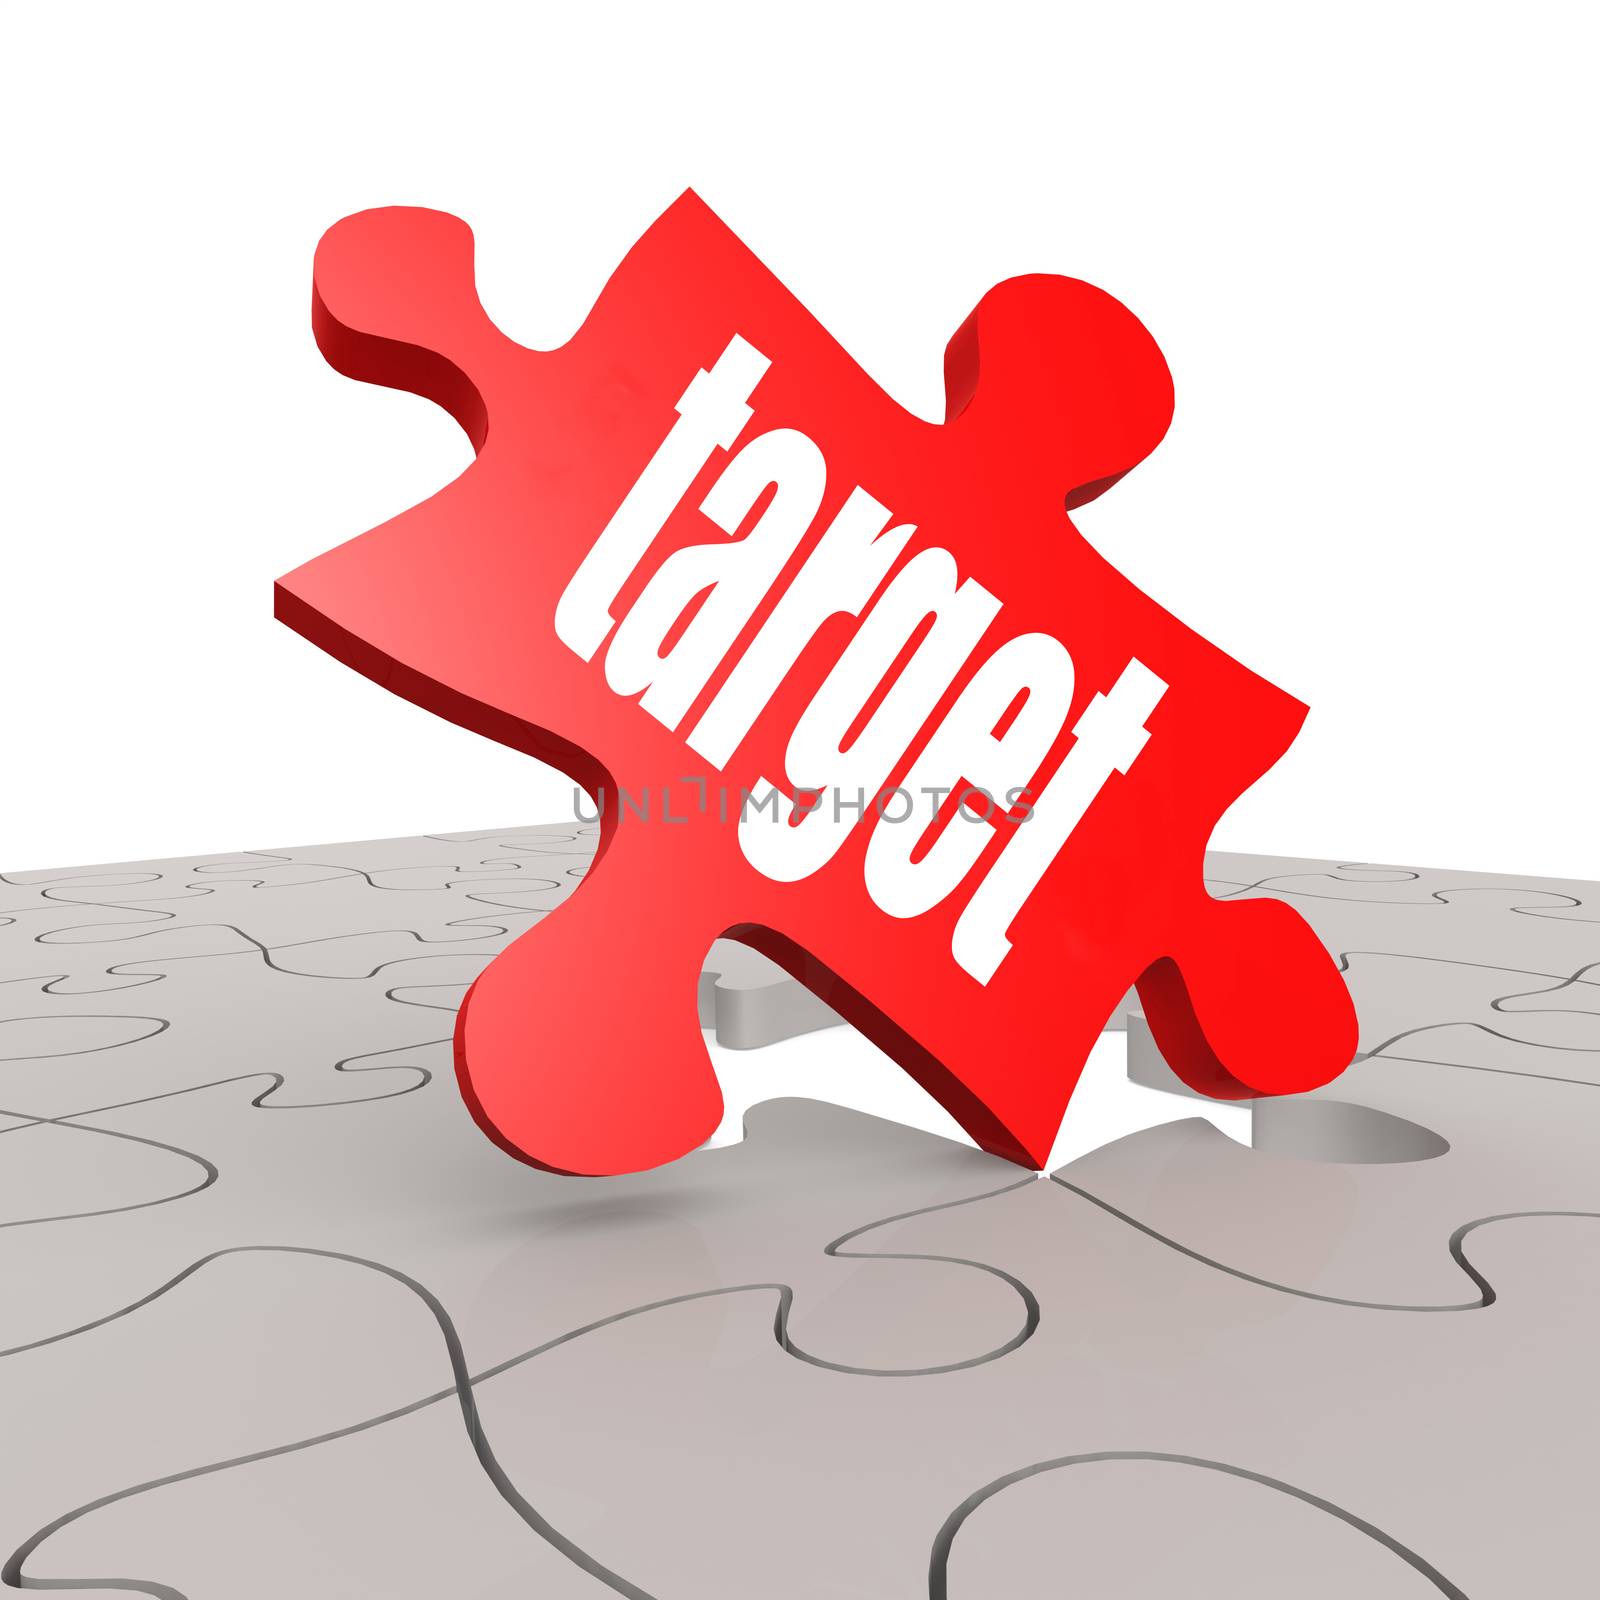 Target word with puzzle background image with hi-res rendered artwork that could be used for any graphic design.